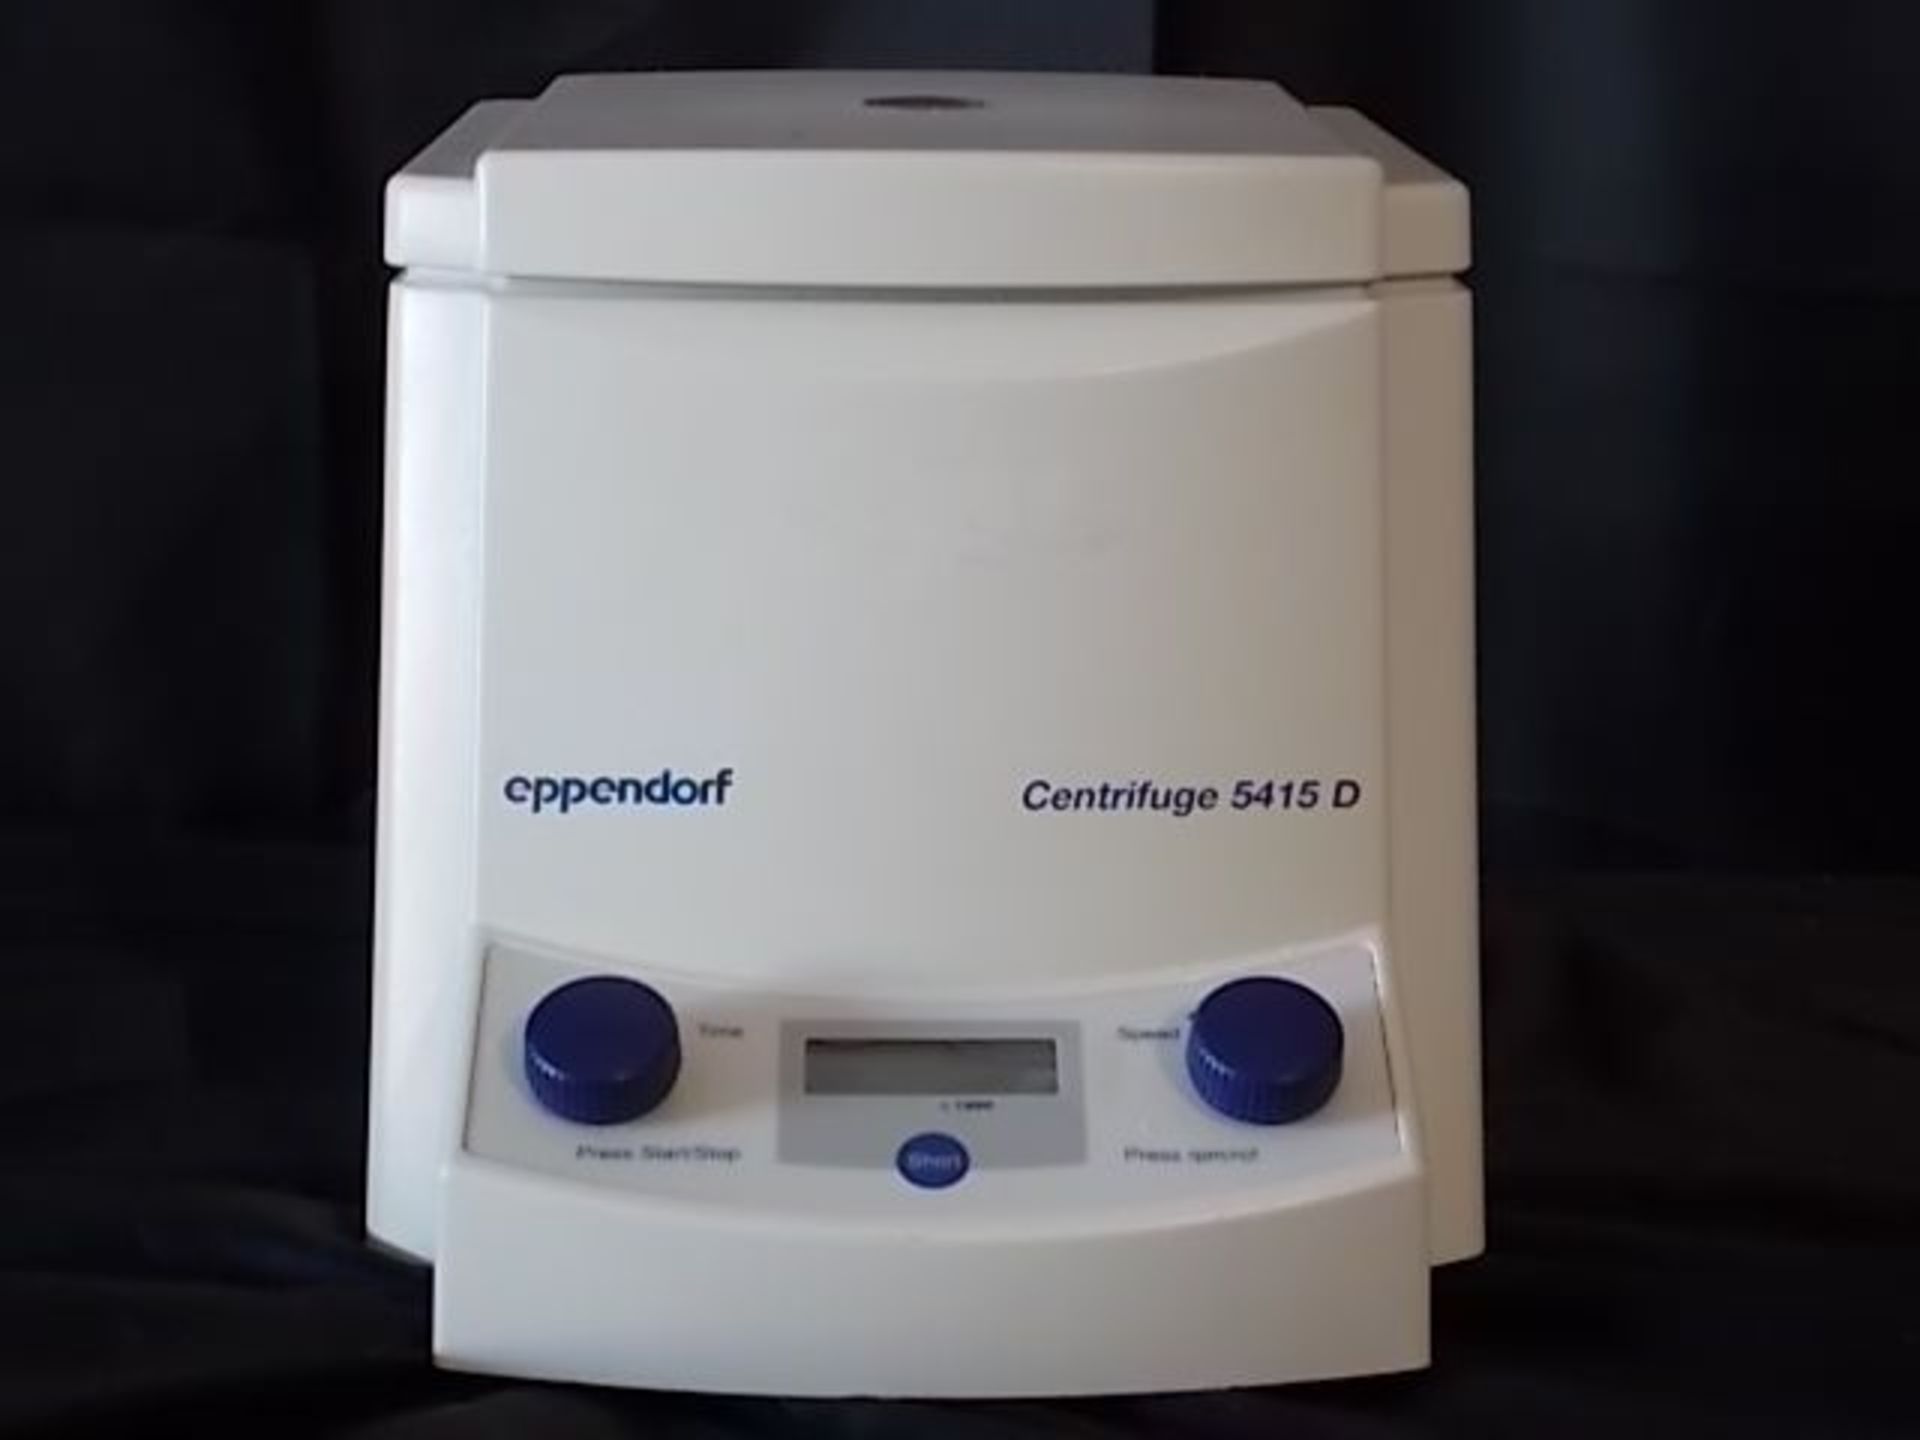 Eppendorf Centrifuge 5415D (5415 D - For Parts) (n), Qty 1, 330874338652